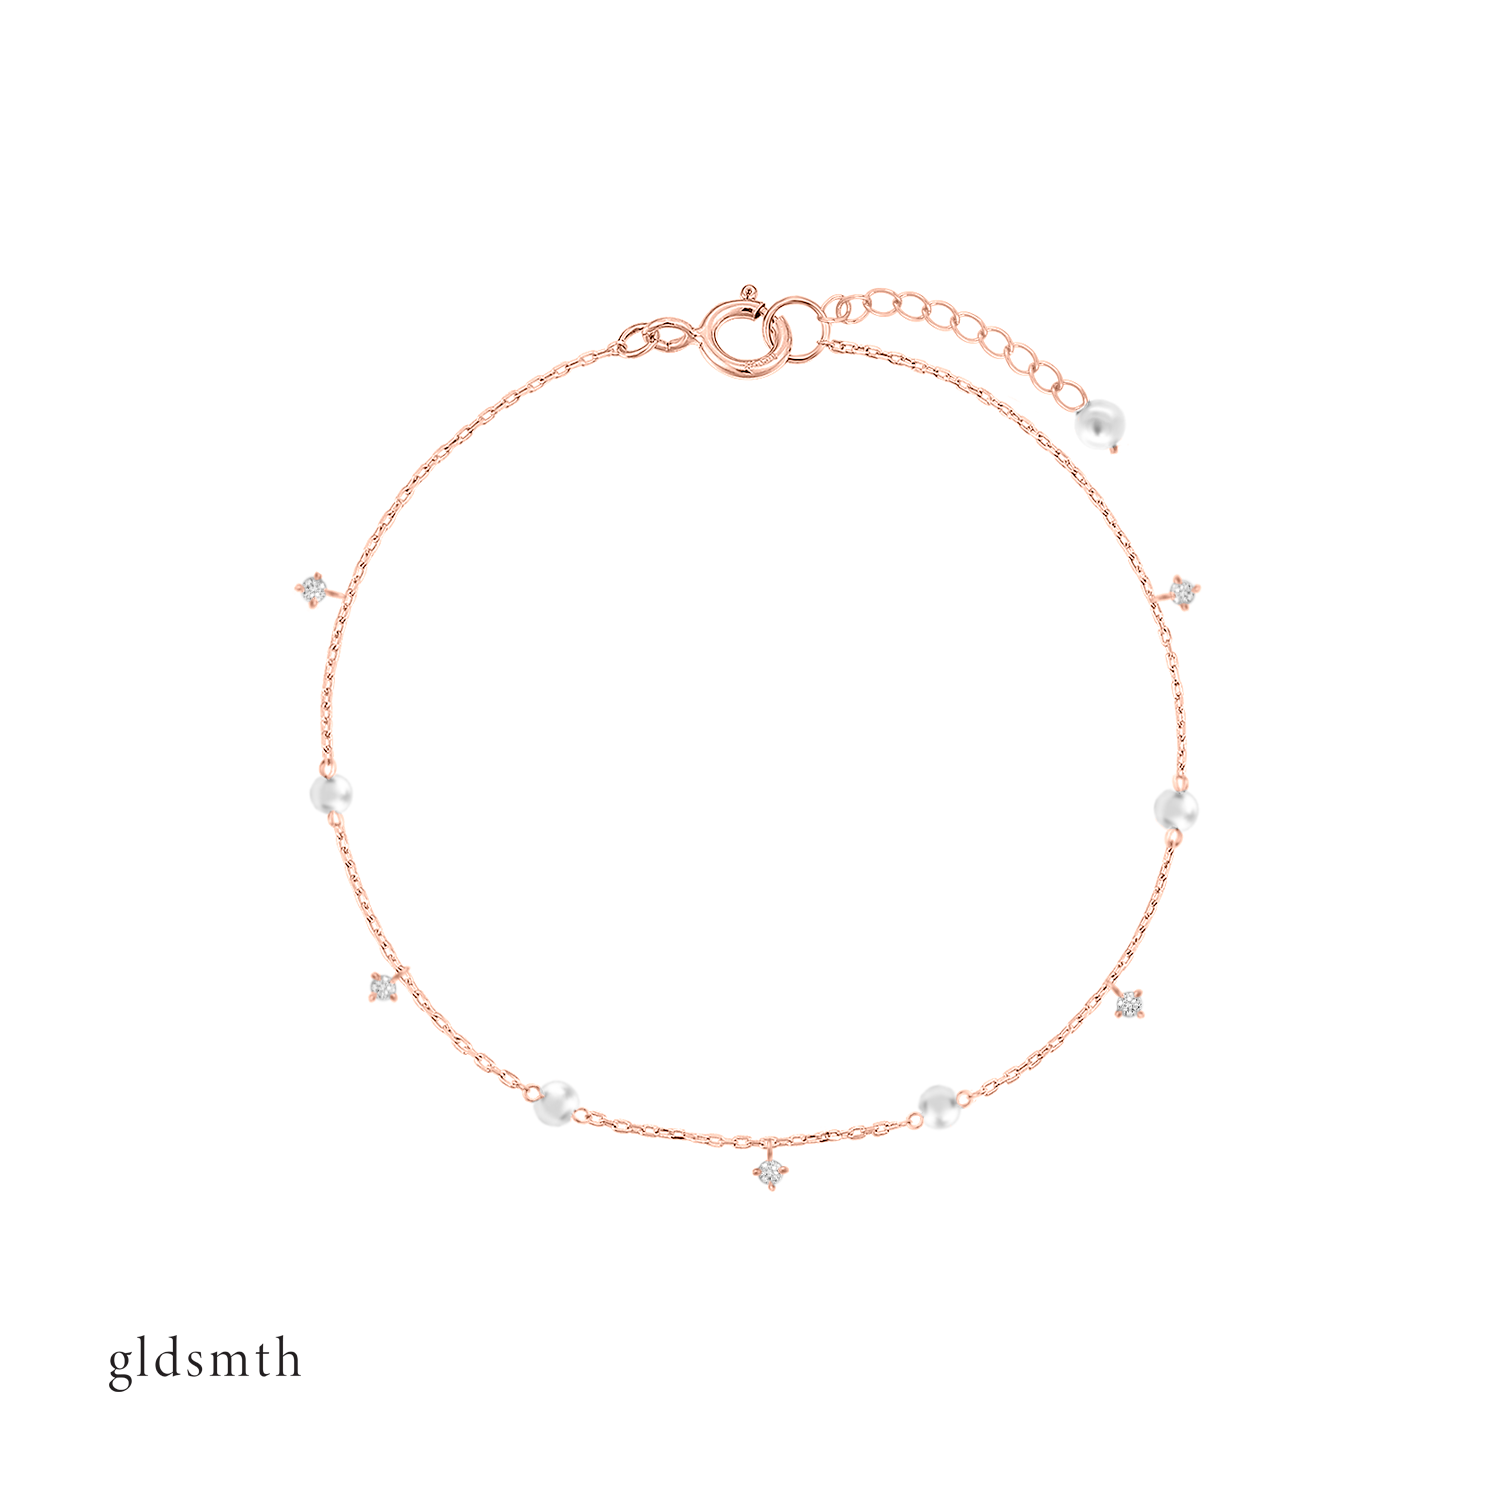 Timeless and elegant hand crafted 10k solid rose gold bracelet with freshwater pearls and conflict-free diamonds.